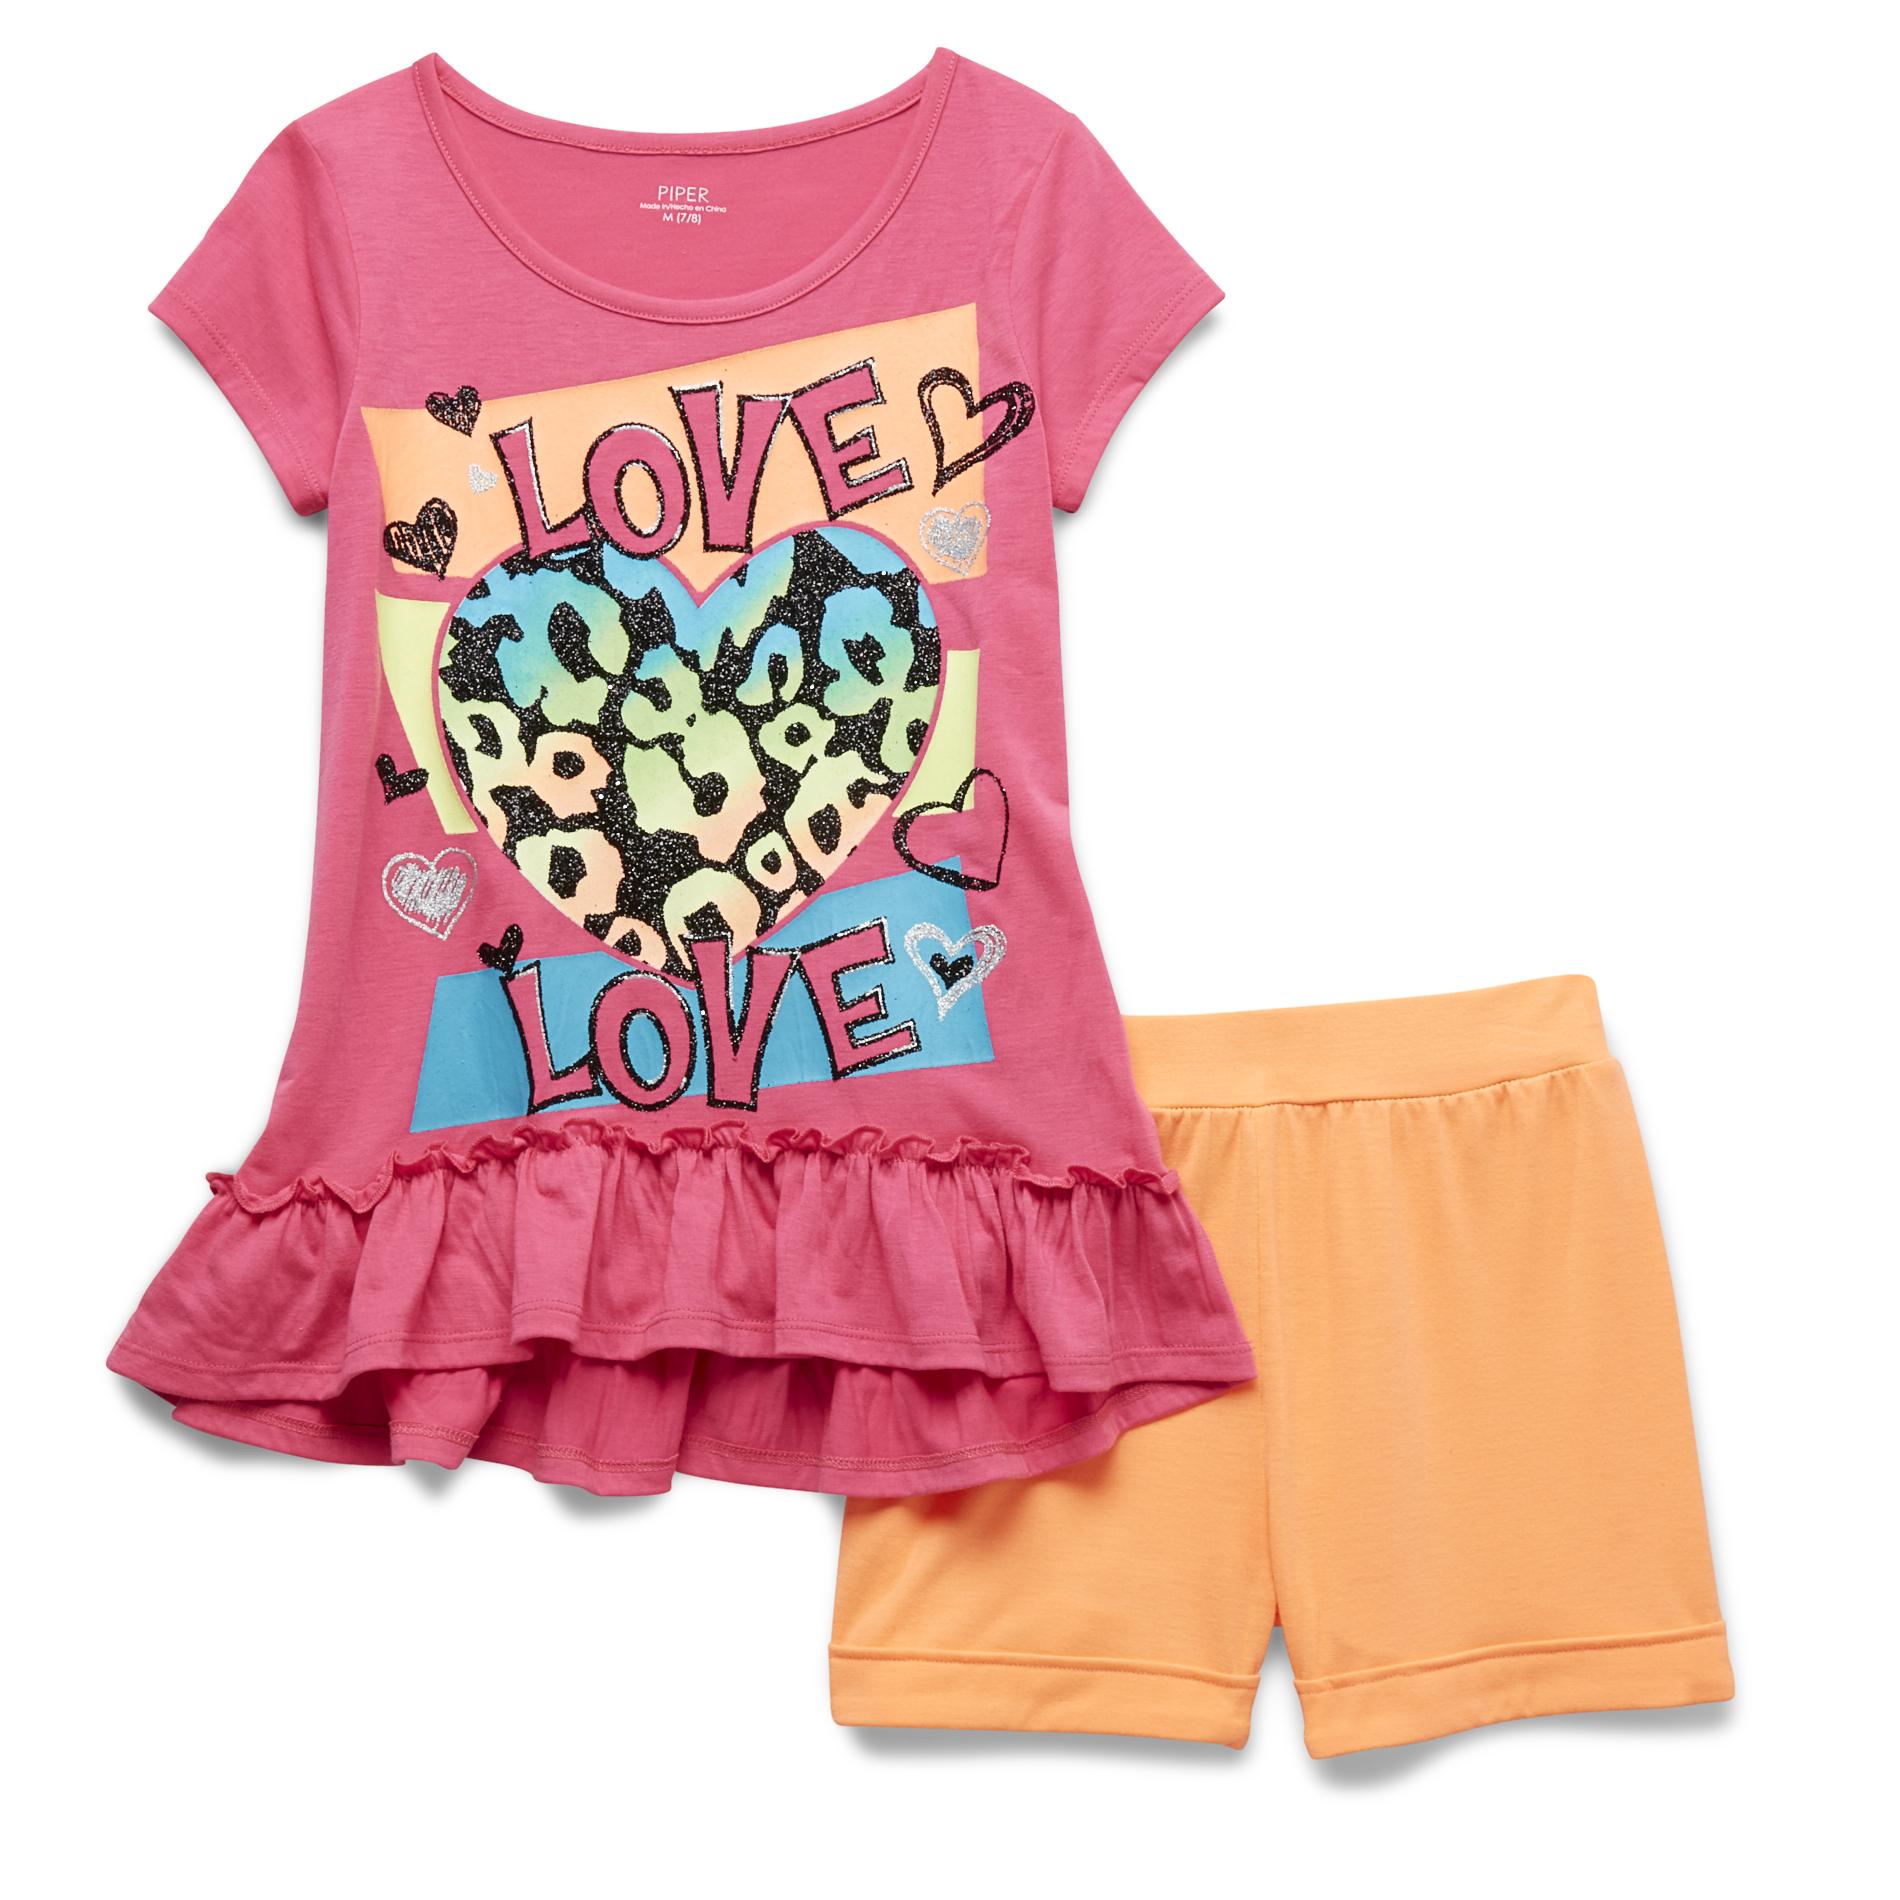 Piper Girl's Graphic T-Shirt & Shorts - Love